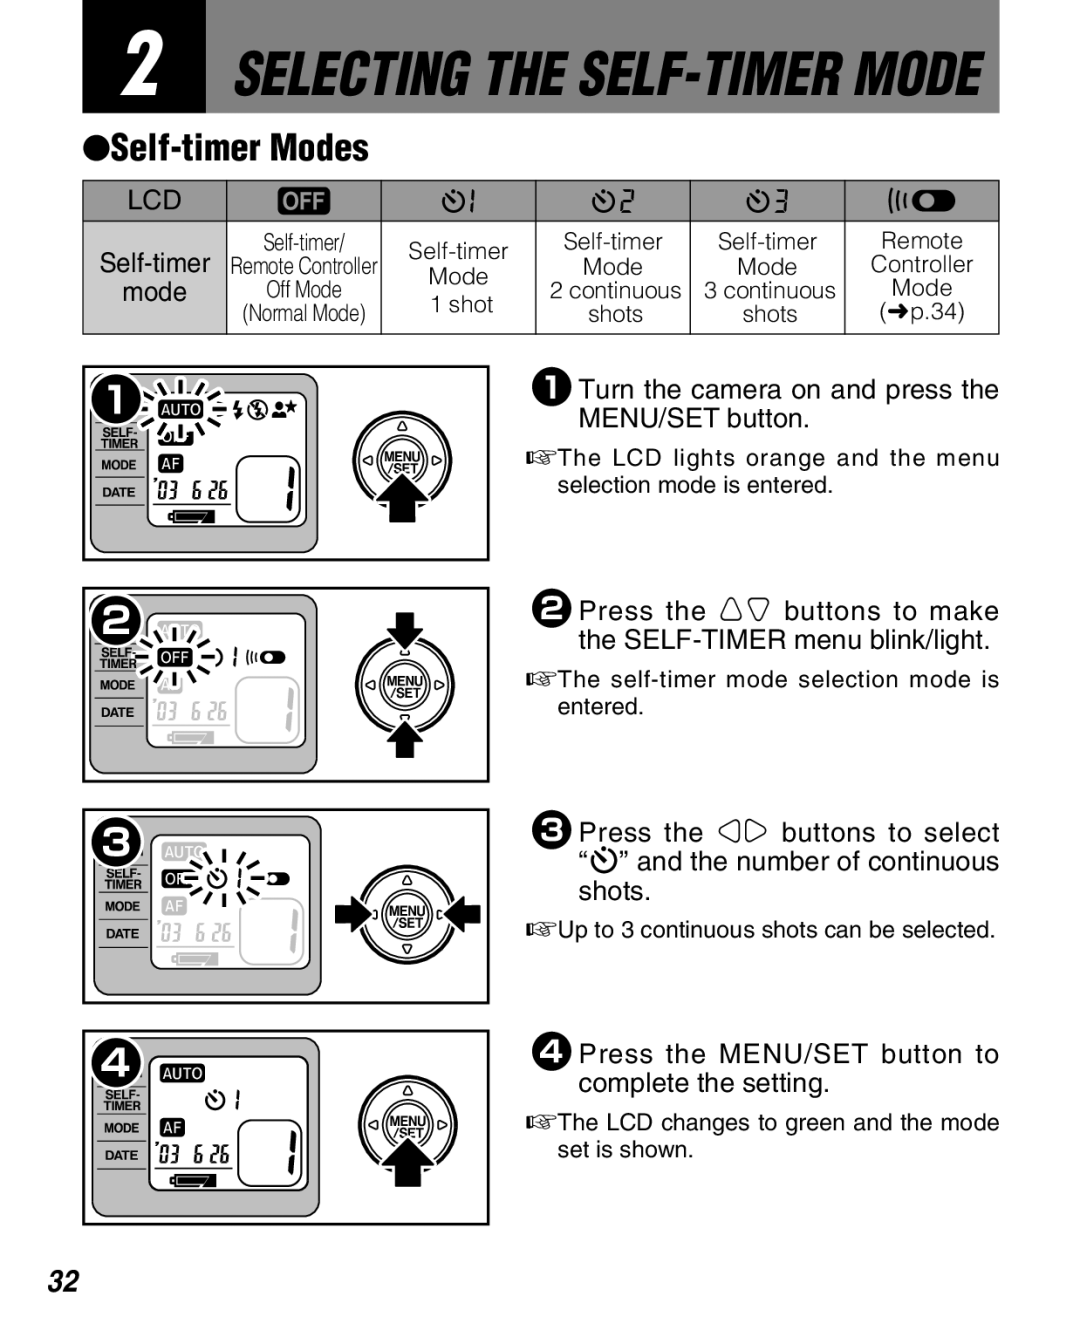 FujiFilm Zoom Date 160ez owner manual Self-timer Modes, Selecting The Self-Timer Mode 